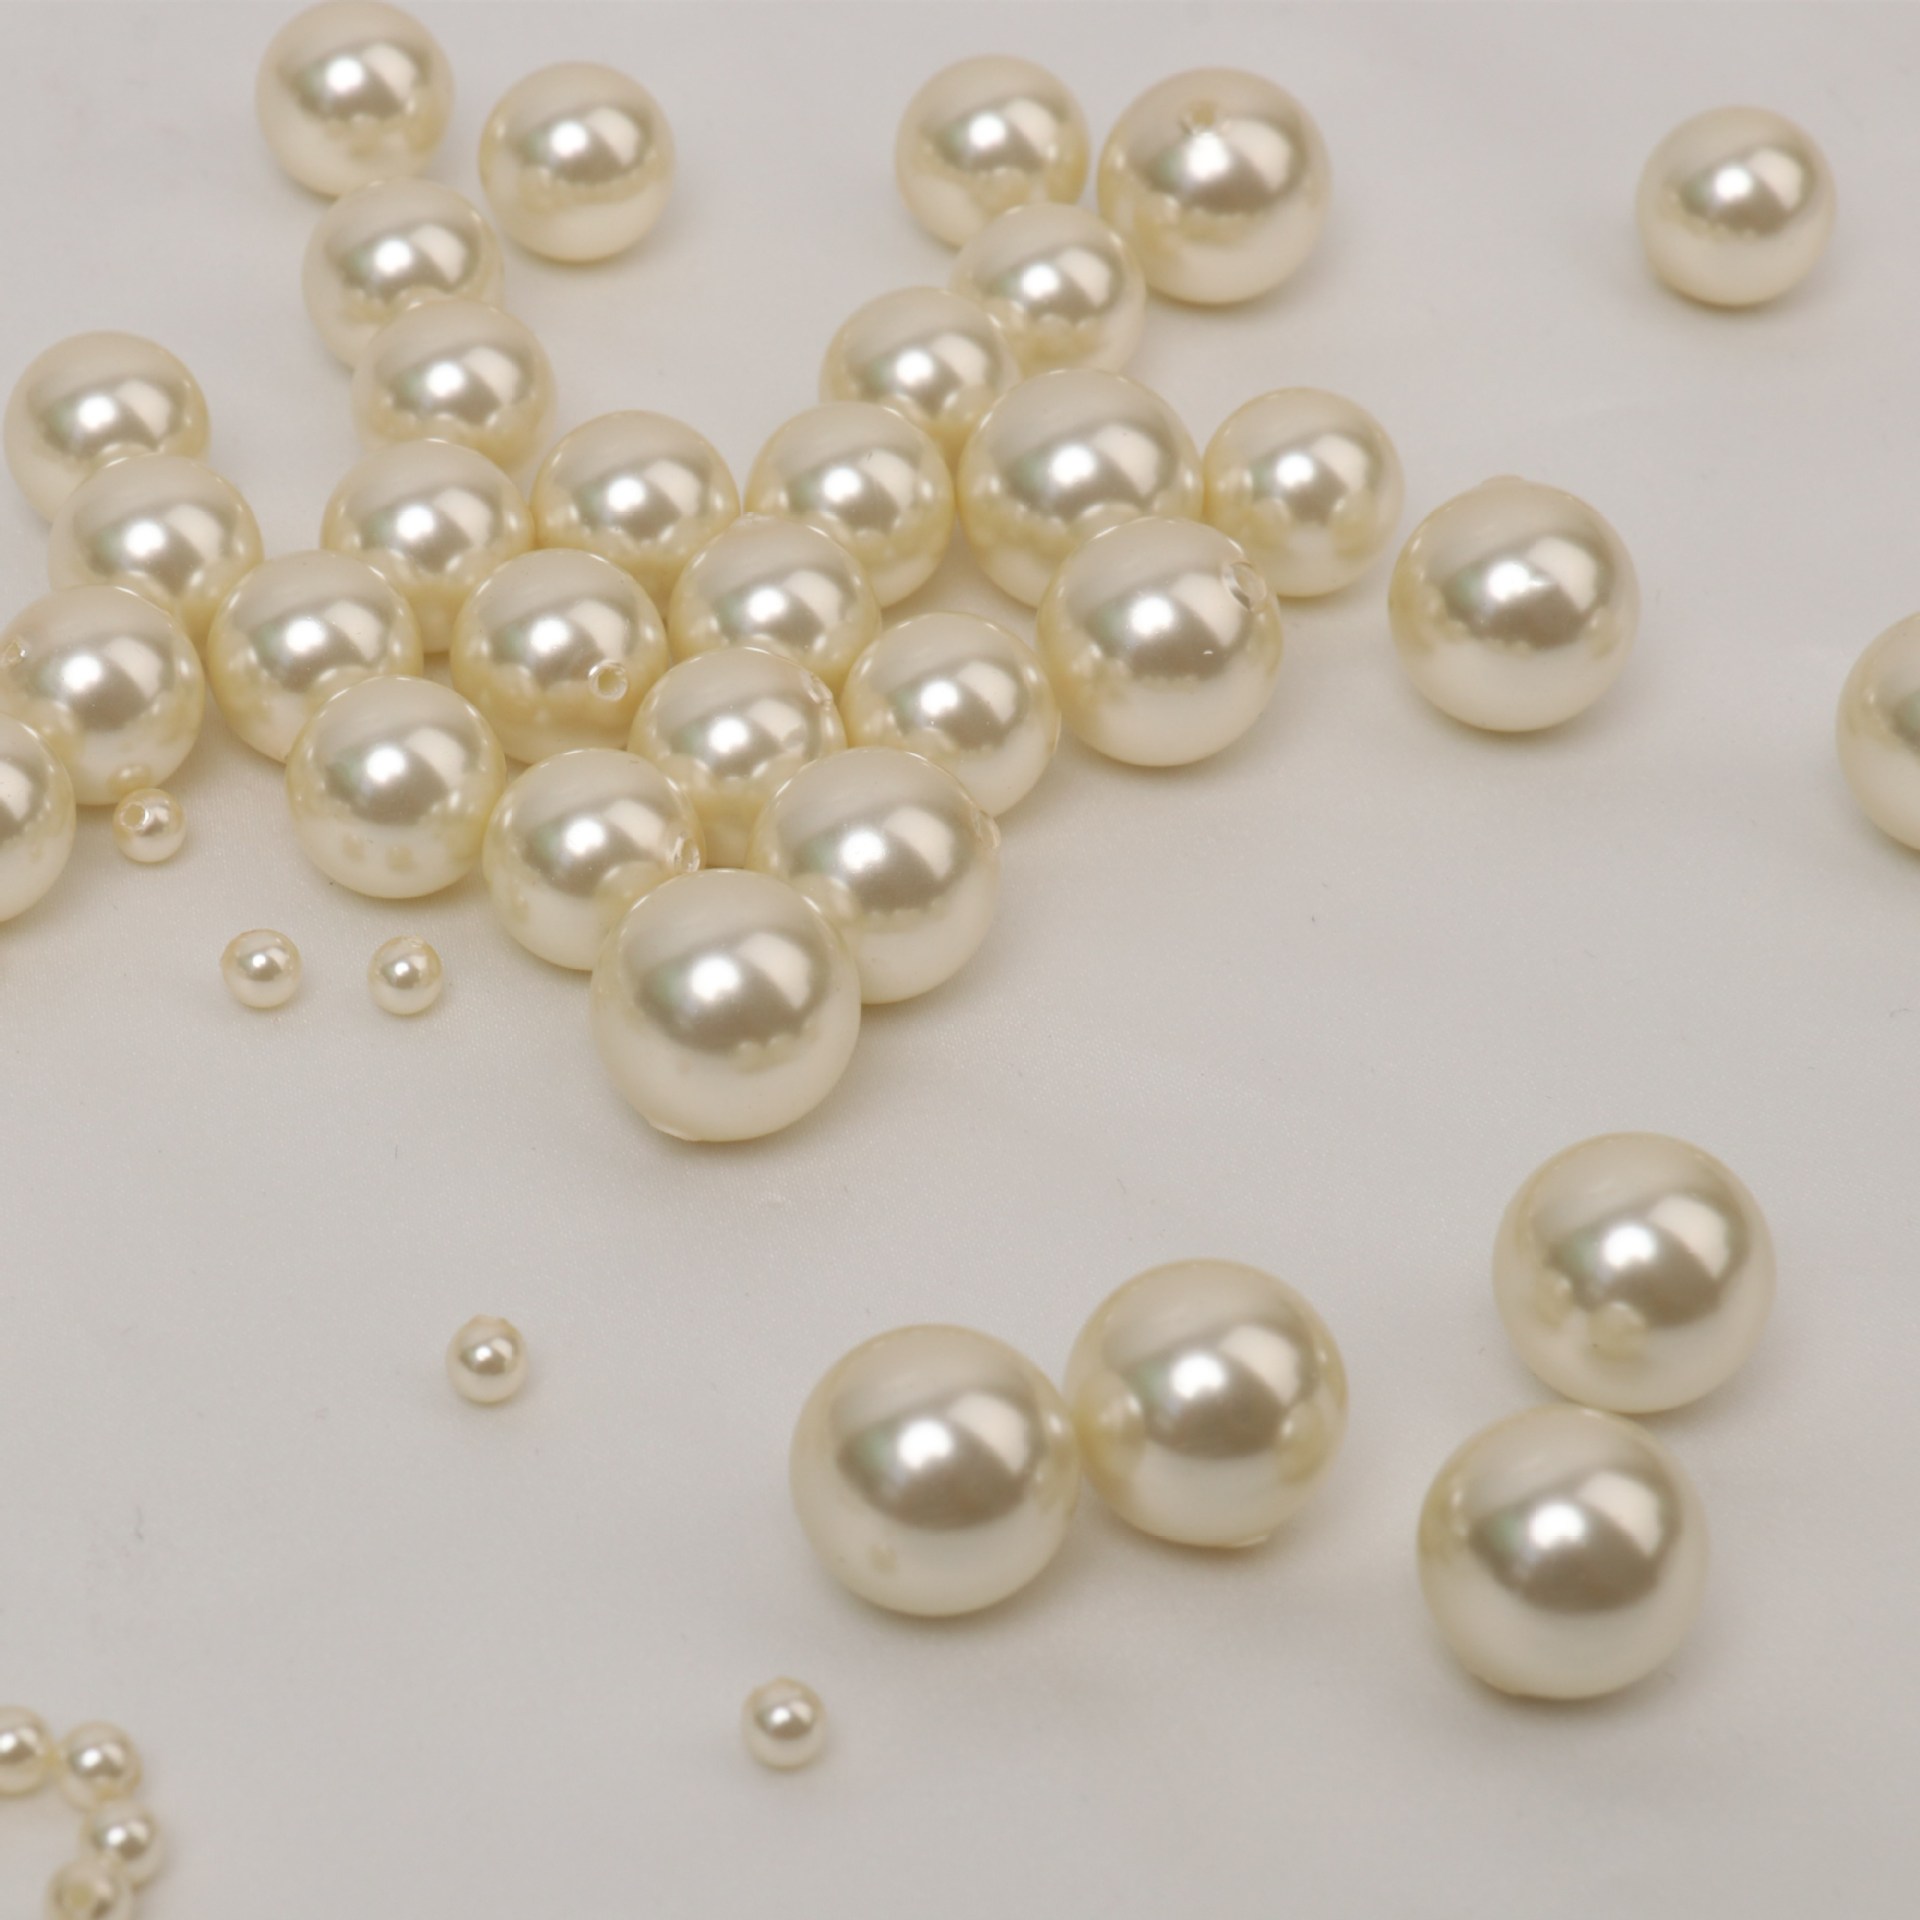 Pearl off-white 5mm